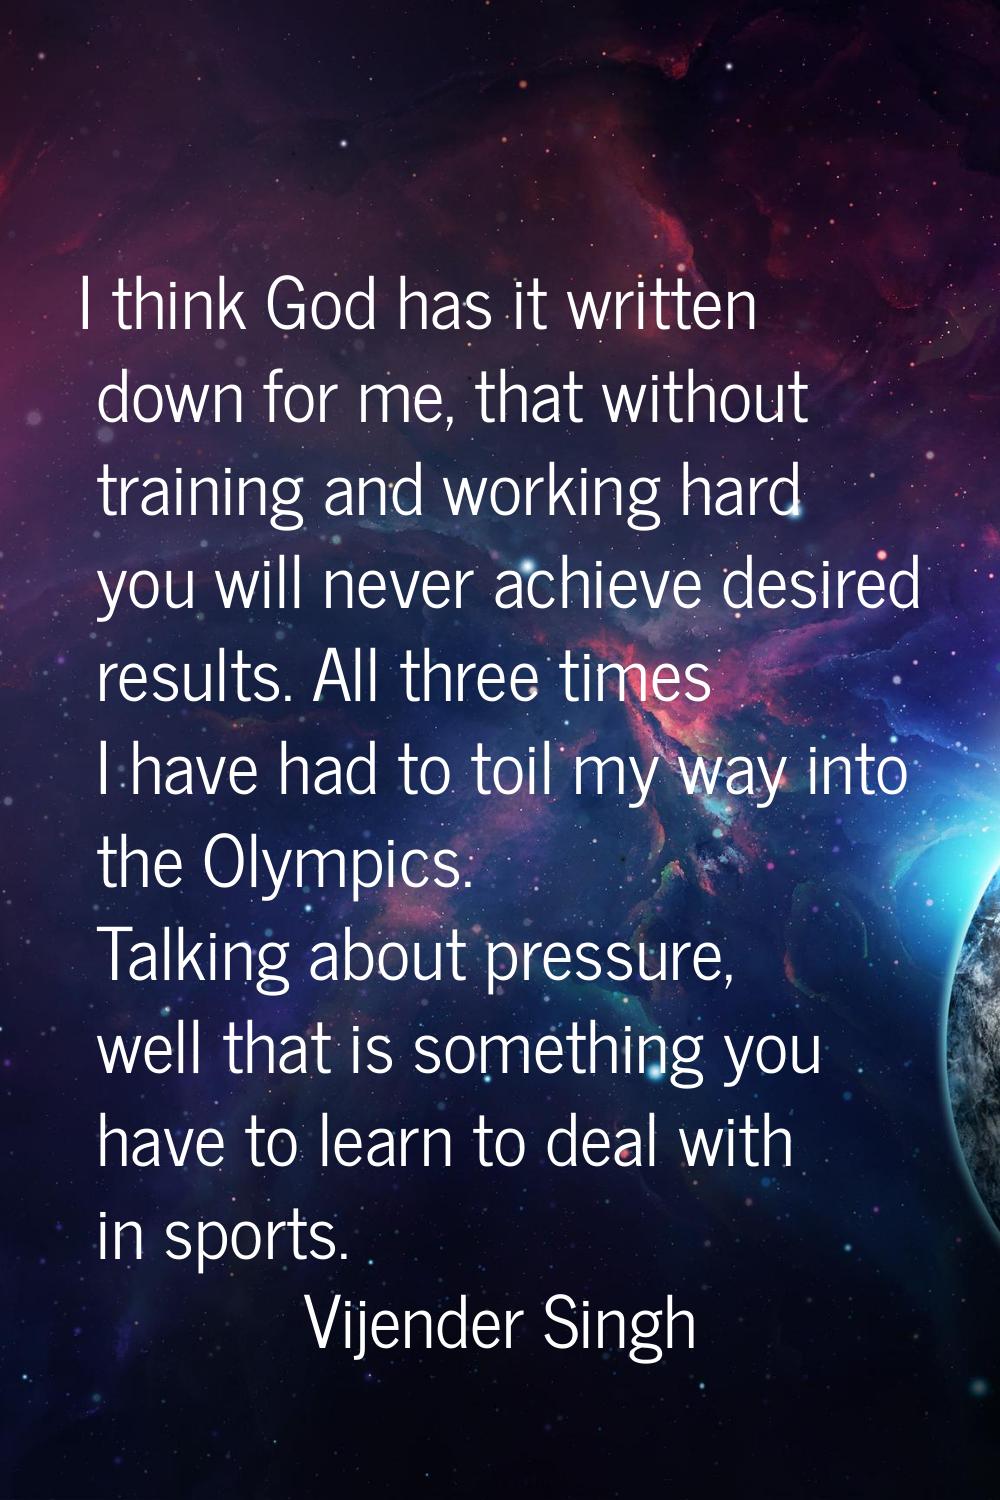 I think God has it written down for me, that without training and working hard you will never achie